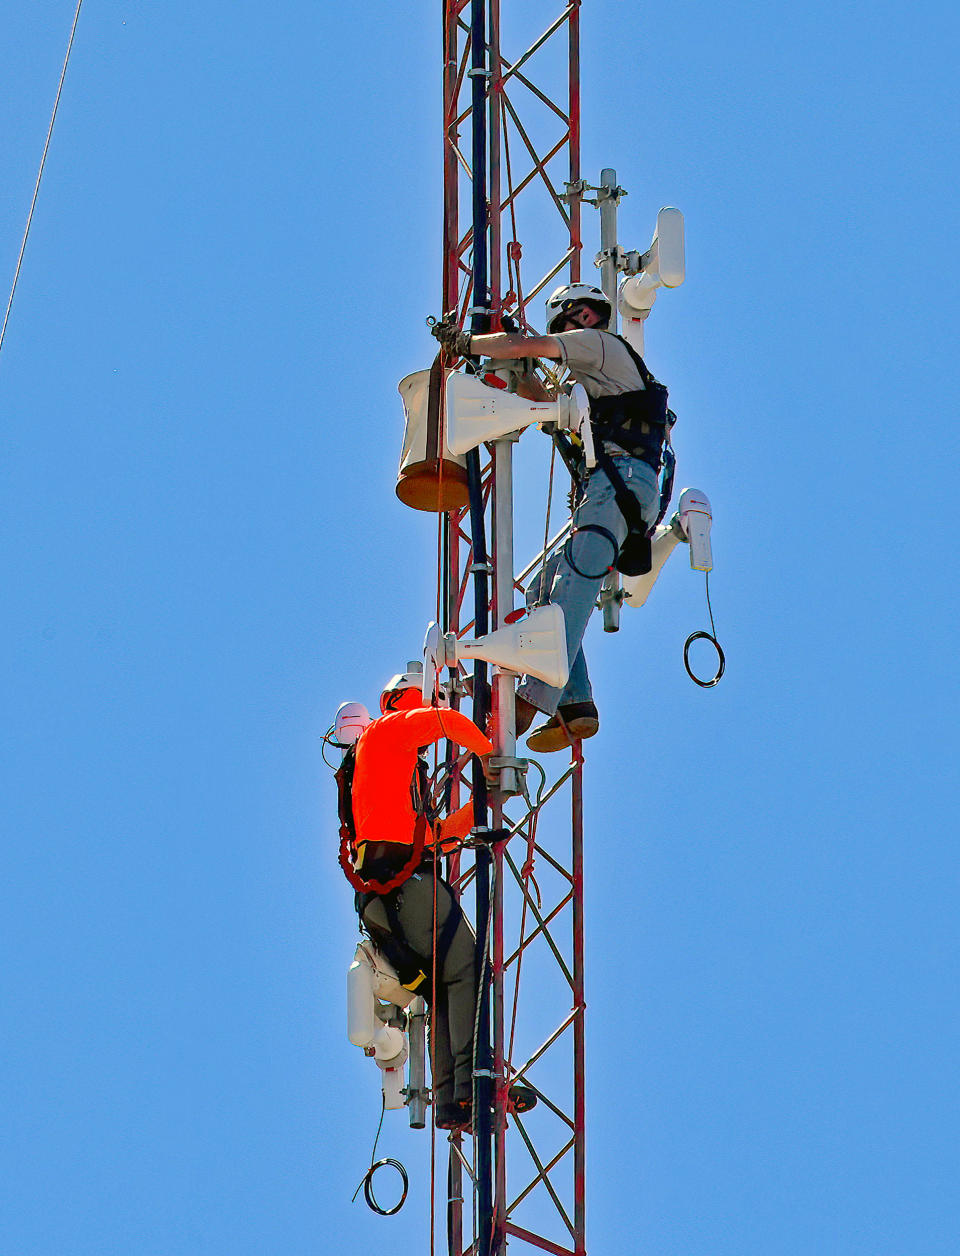 Tower technician install broadband transmitters on a  radio tower on the western edge of Emporia, Kansas in September 2022. (Mark Reinstein / MediaPunch/IPx via AP)